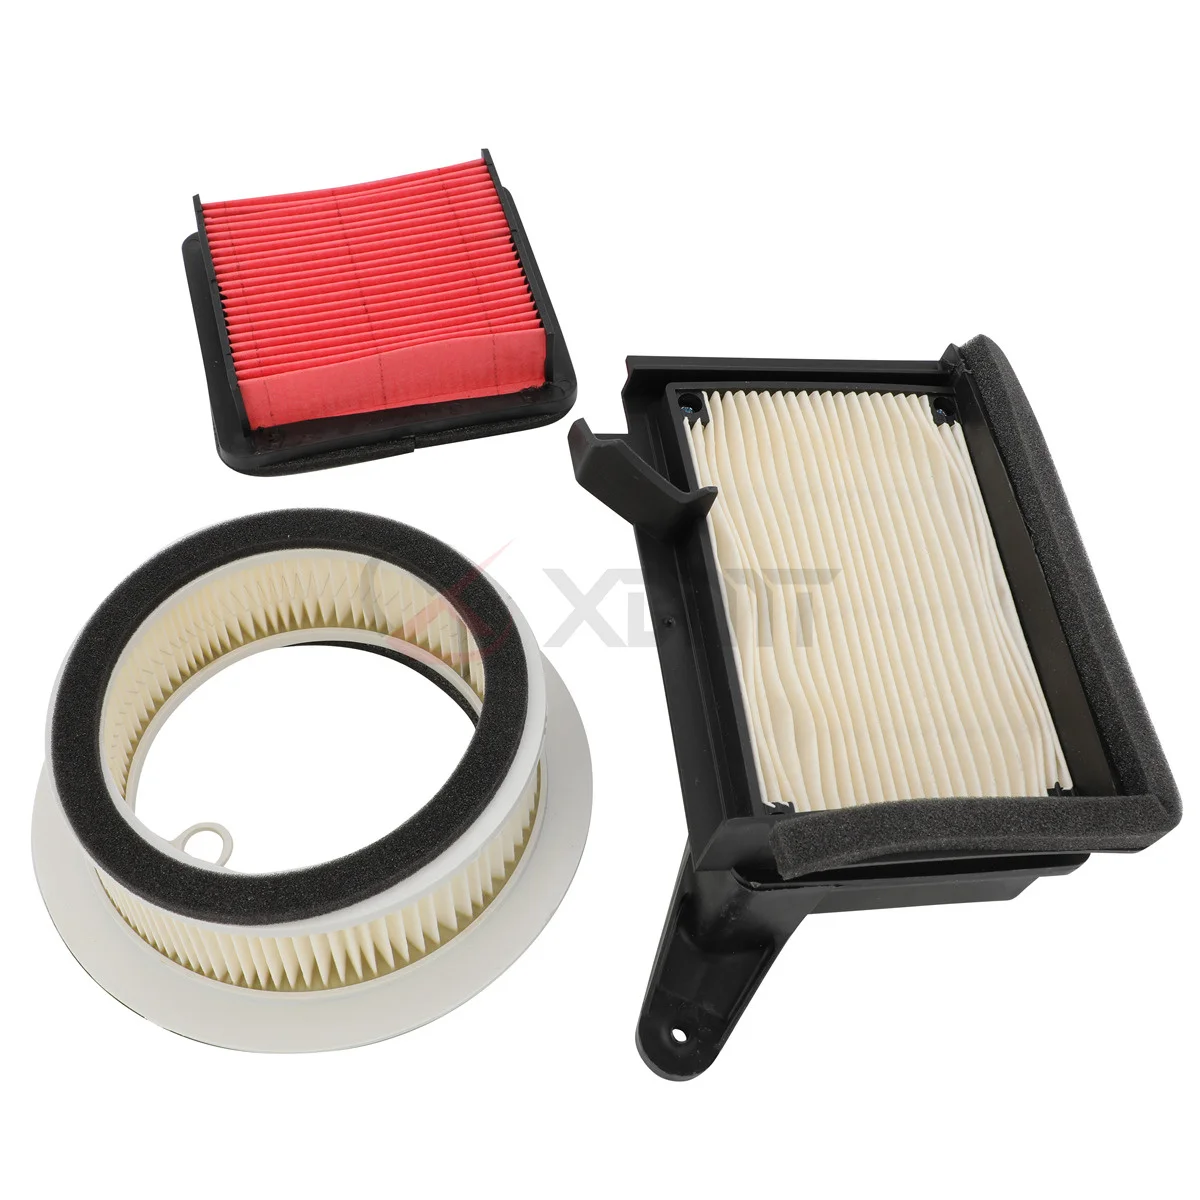 

Motorcycle Air Filter Intake Cleaner For Yamaha XP530 TMax530 T-Max 530 SX DX 2017 2018 2019 TMax 560 ABS 2019-2020